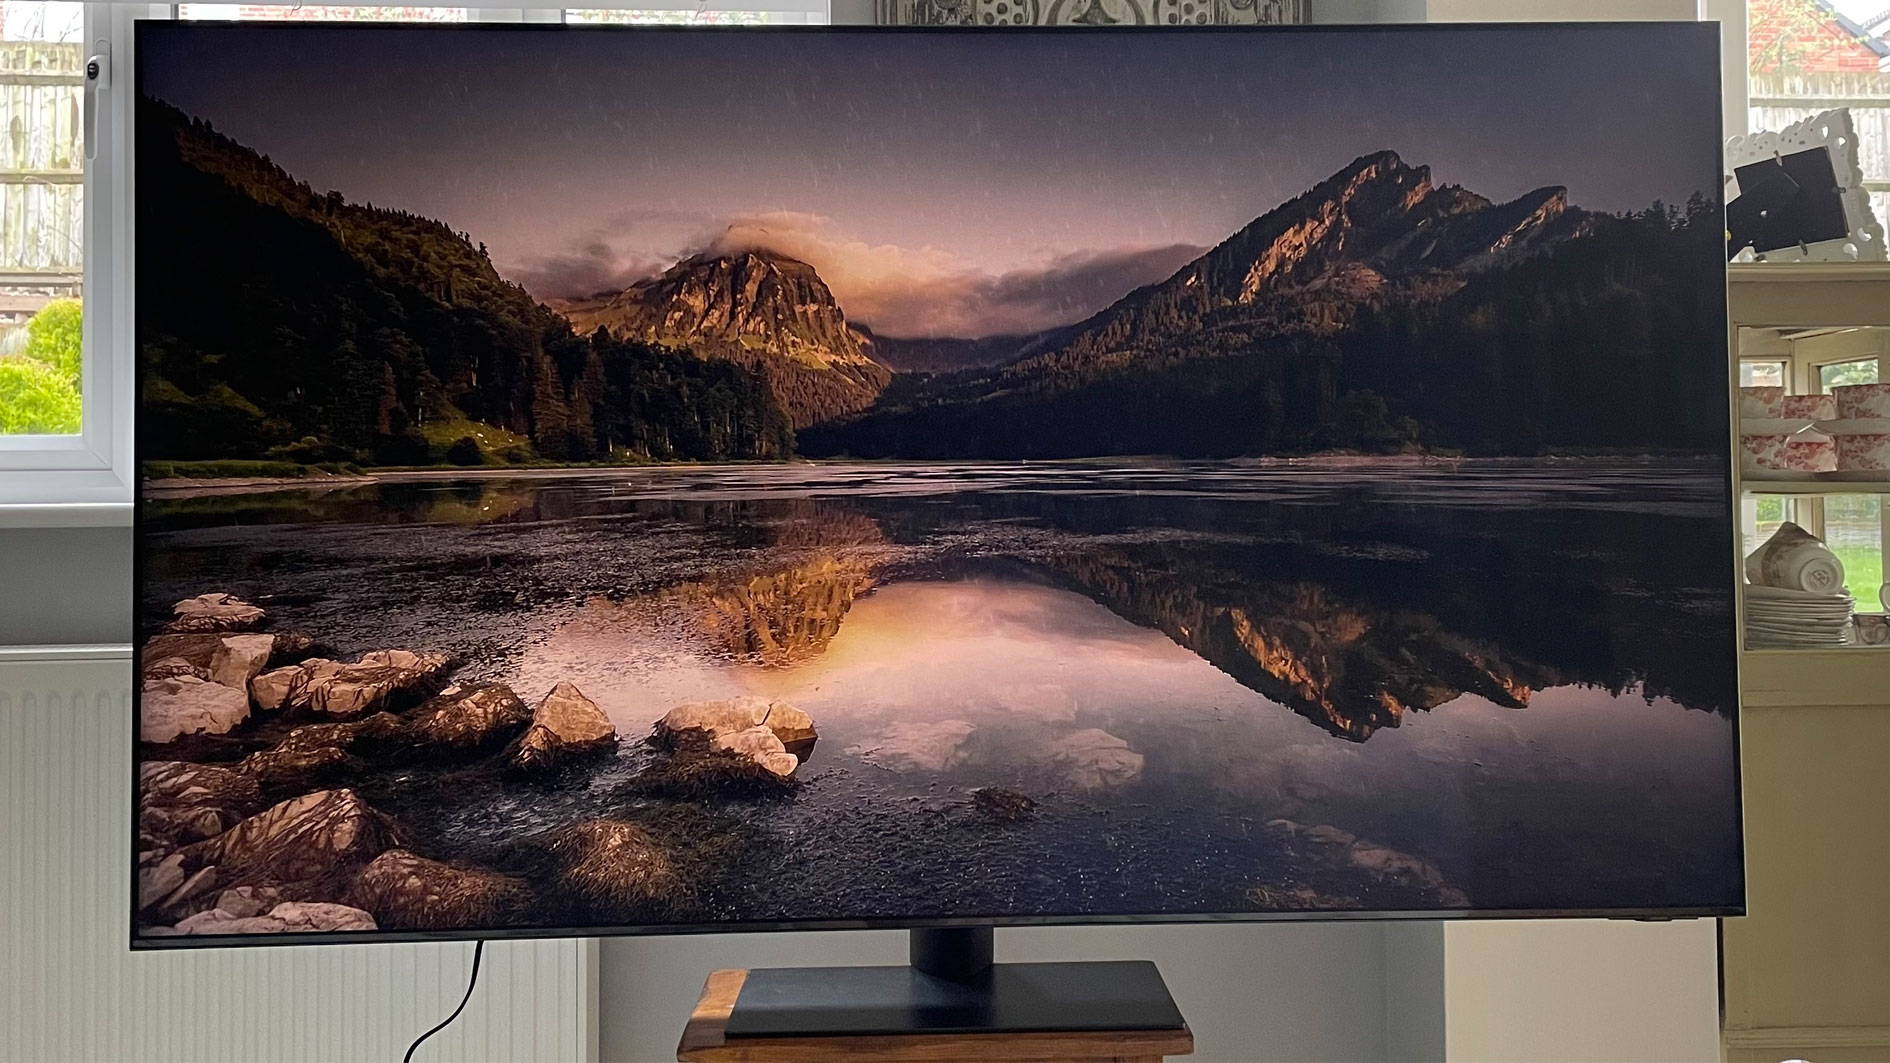 New Xiaomi TV S Pro cheaper 4K Mini LED model with 144Hz refresh rate  arrives -  News